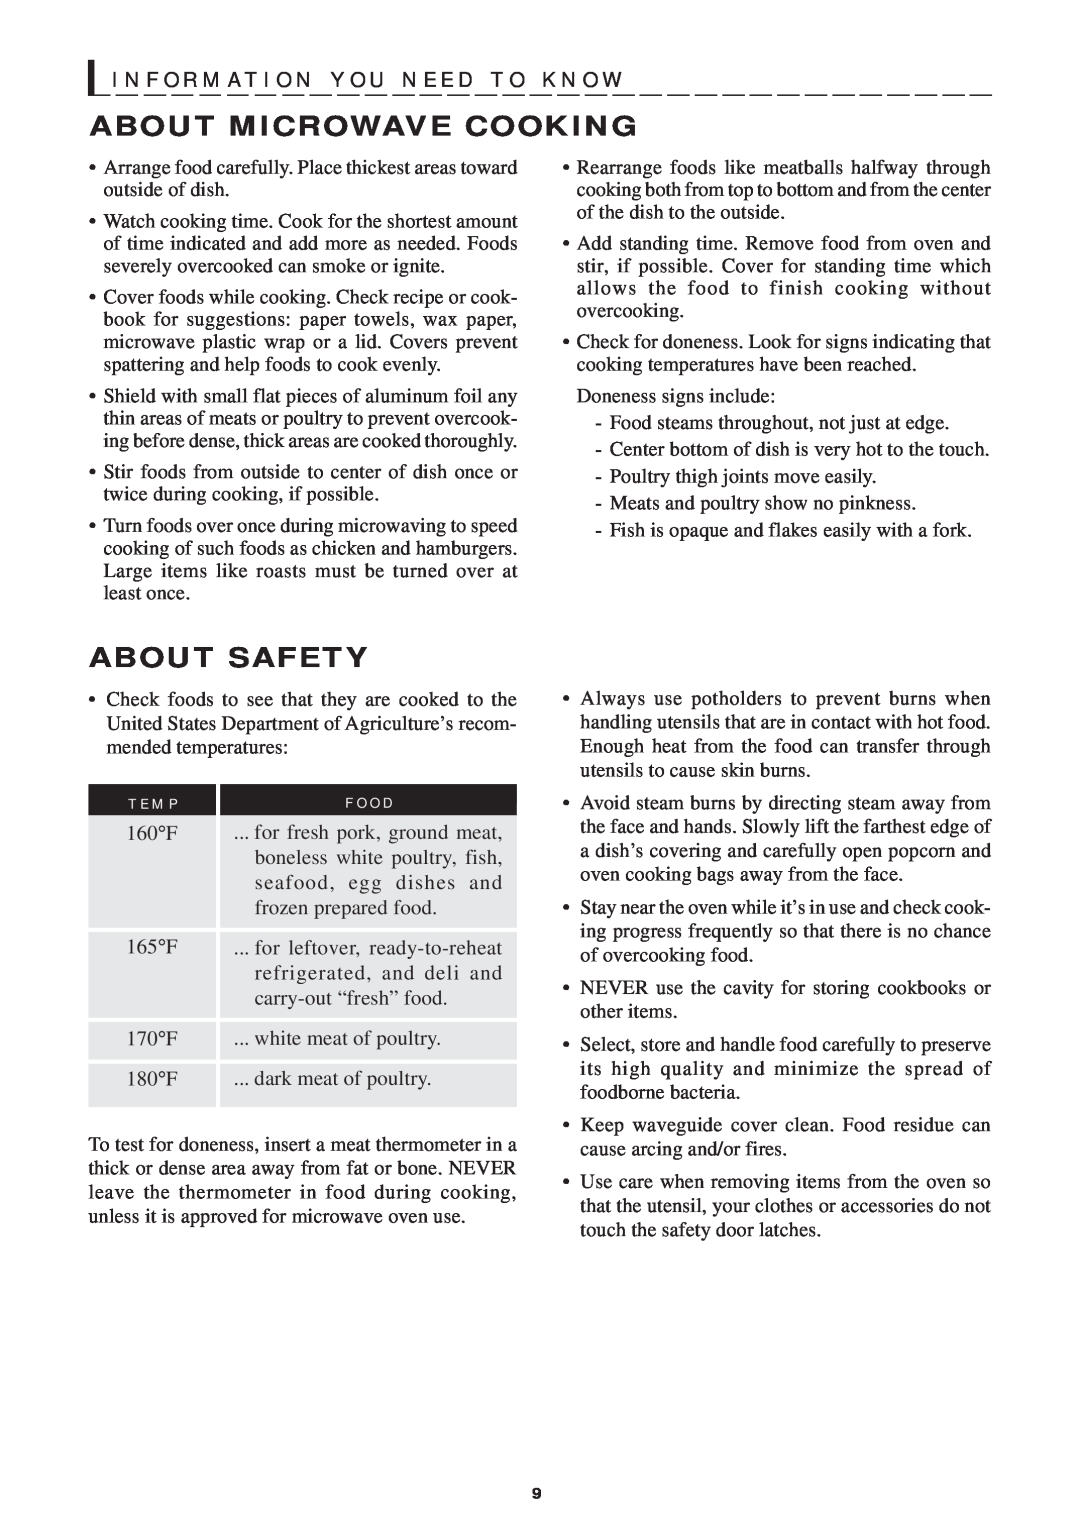 Sharp R-1750 manual About Microwave Cooking, About Safety, T E M P, I N F O R M At I O N Y O U N E E D T O K N O W, F O O D 